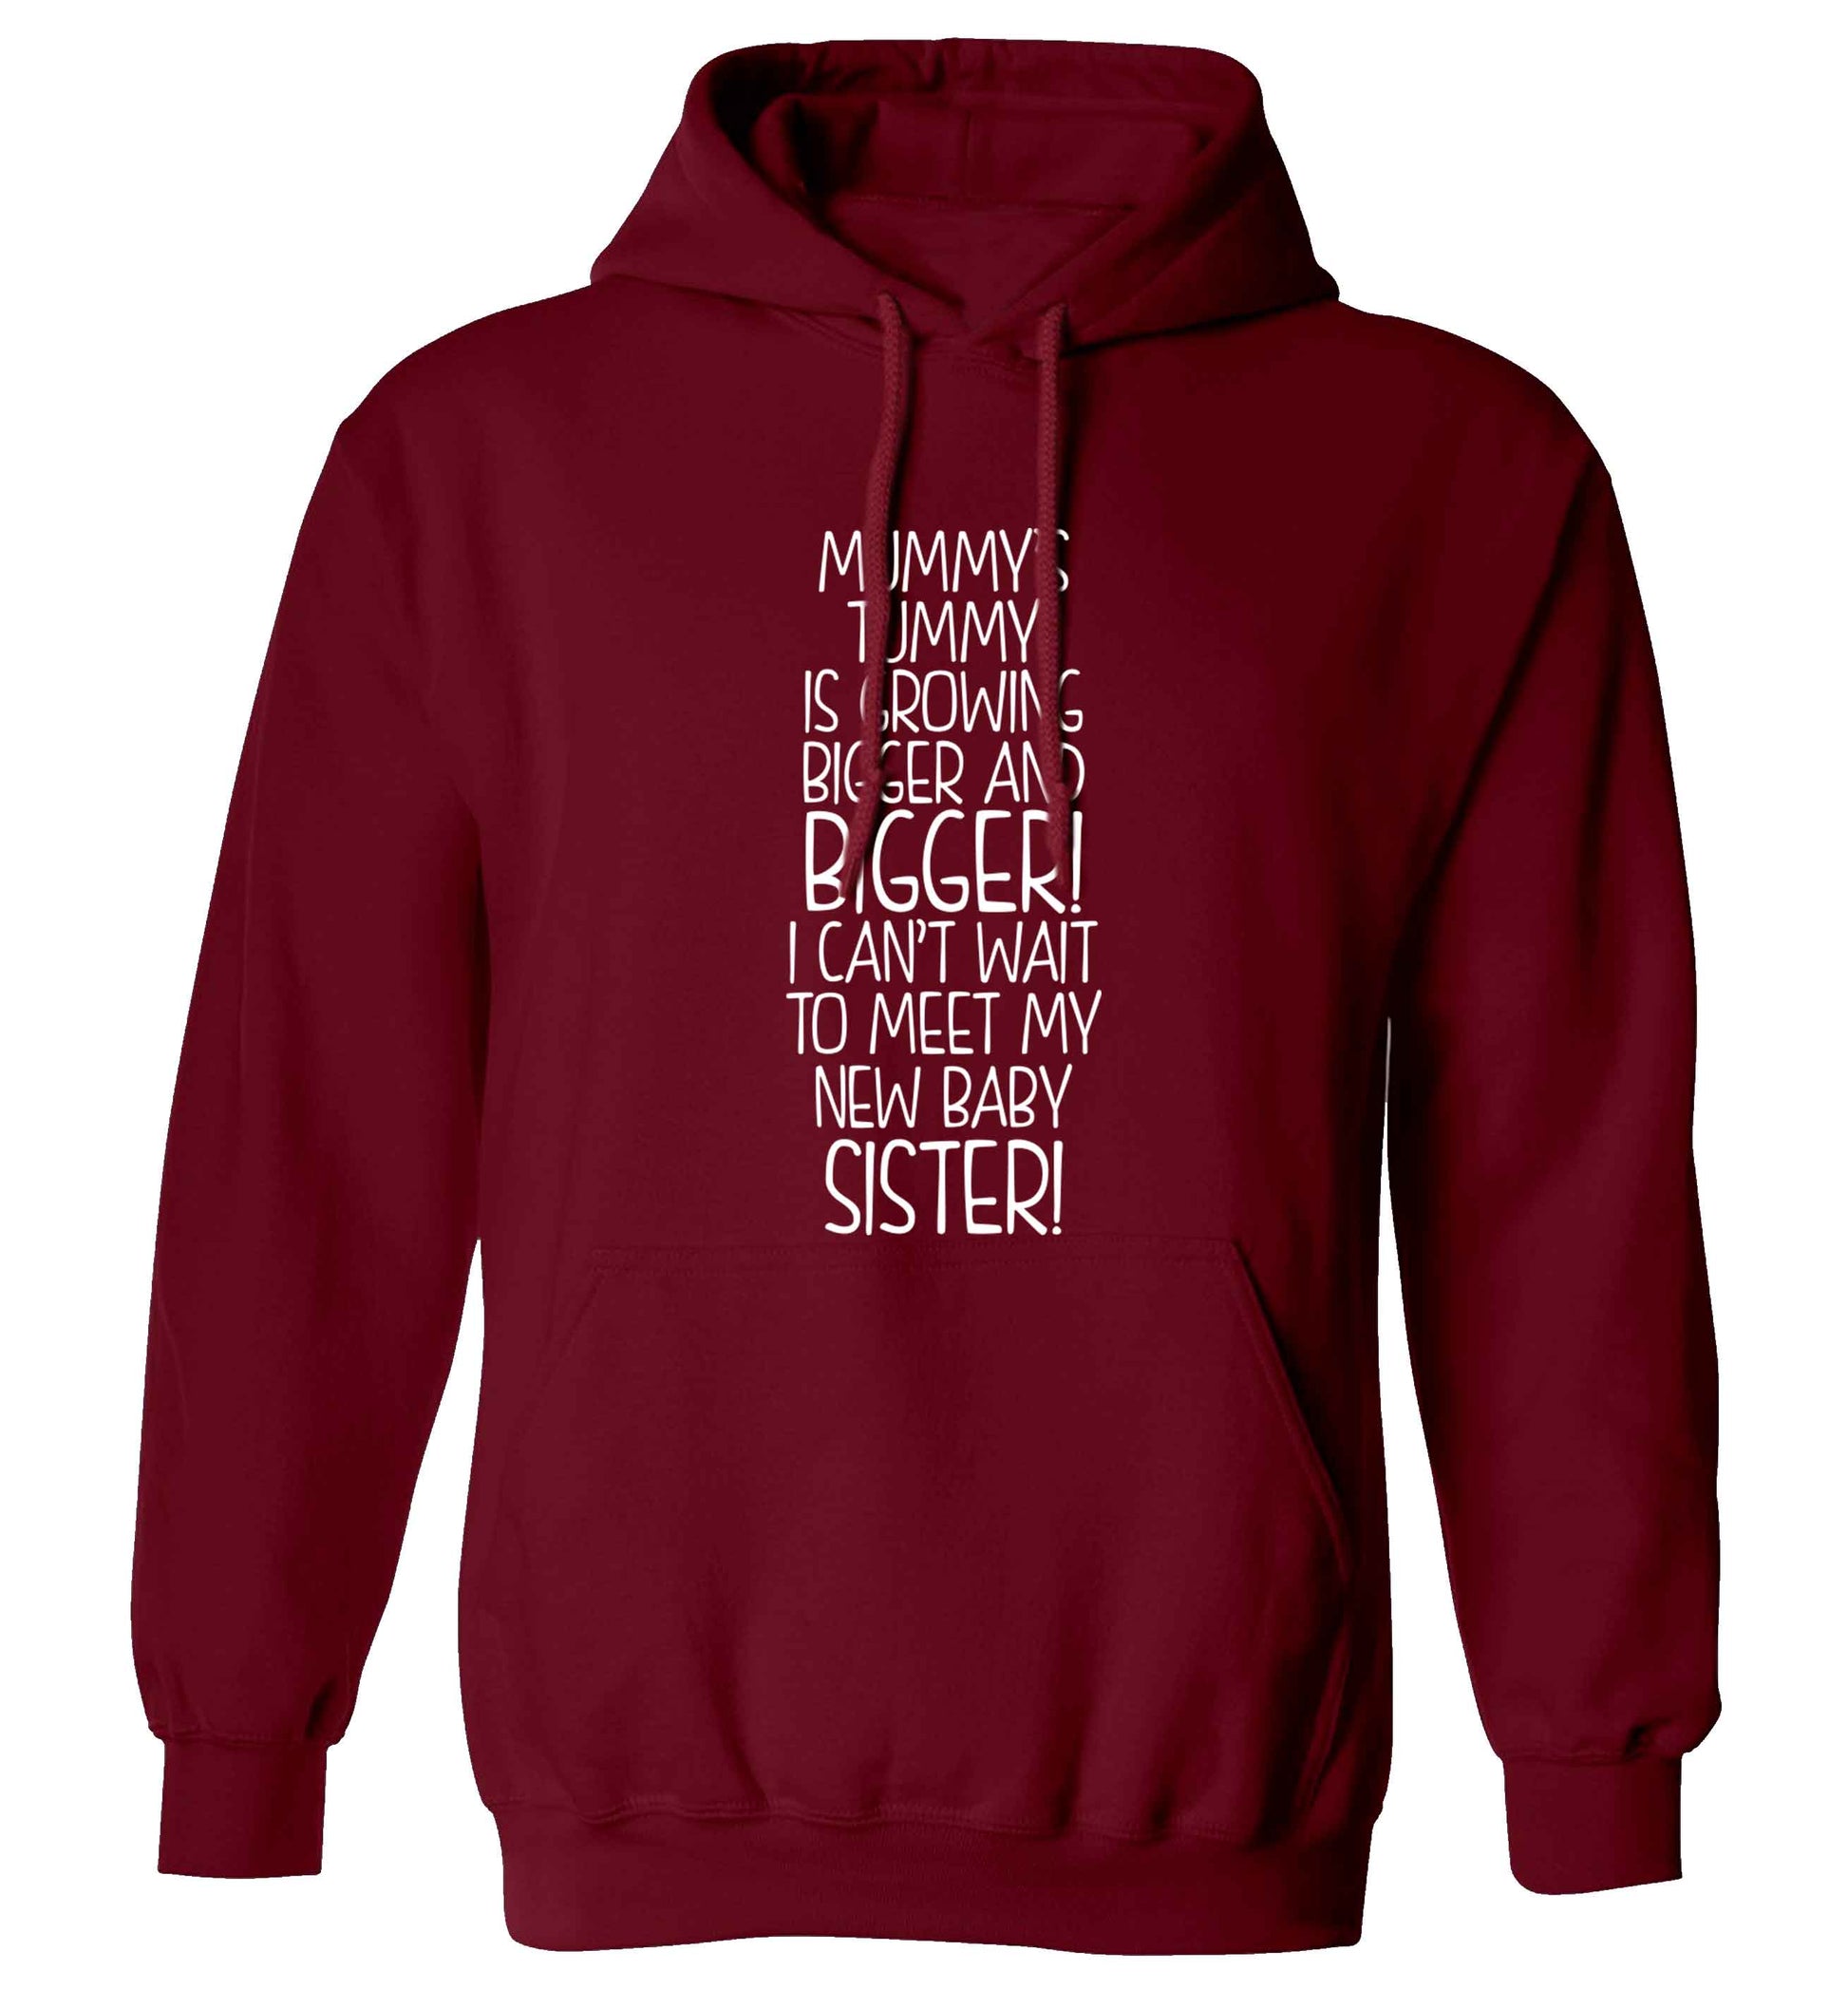 Mummy's tummy is growing bigger and bigger I can't wait to meet my new baby sister! adults unisex maroon hoodie 2XL